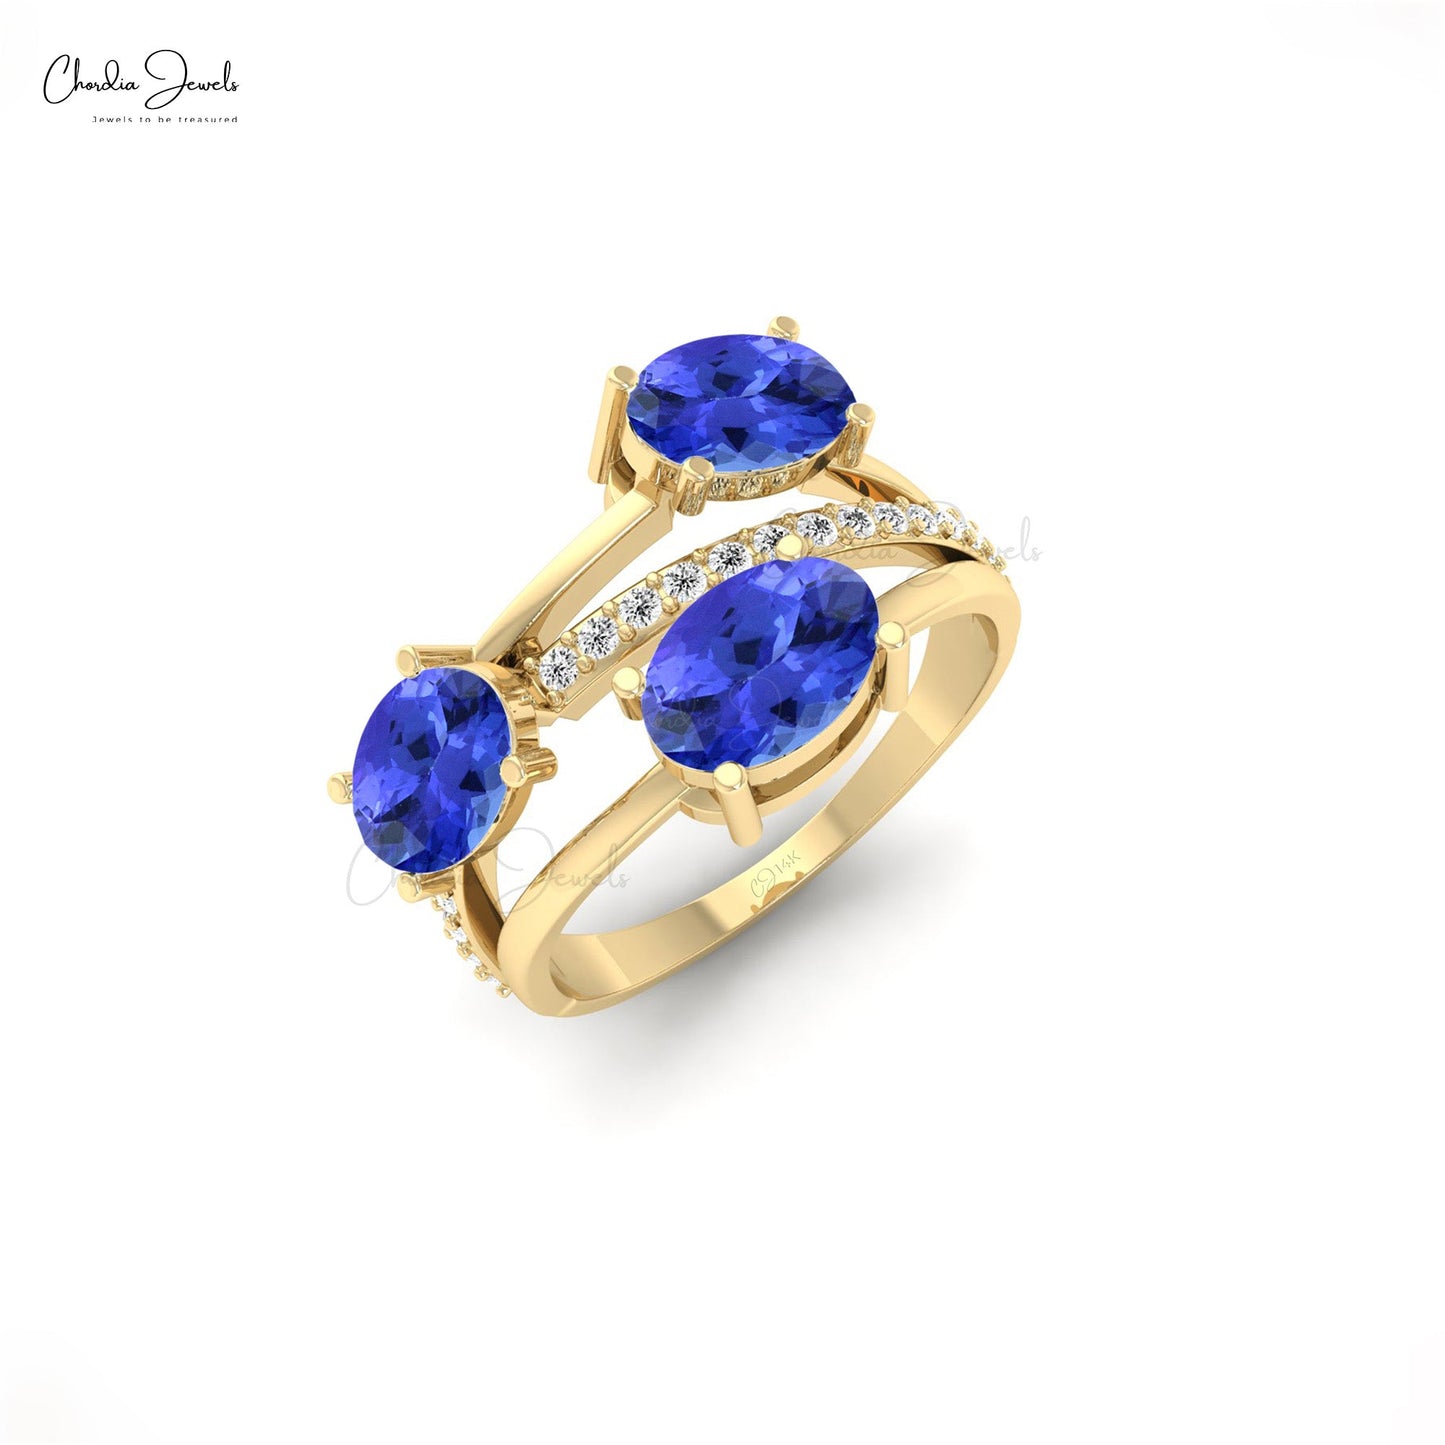 Load image into Gallery viewer, Tanzanite Ring
